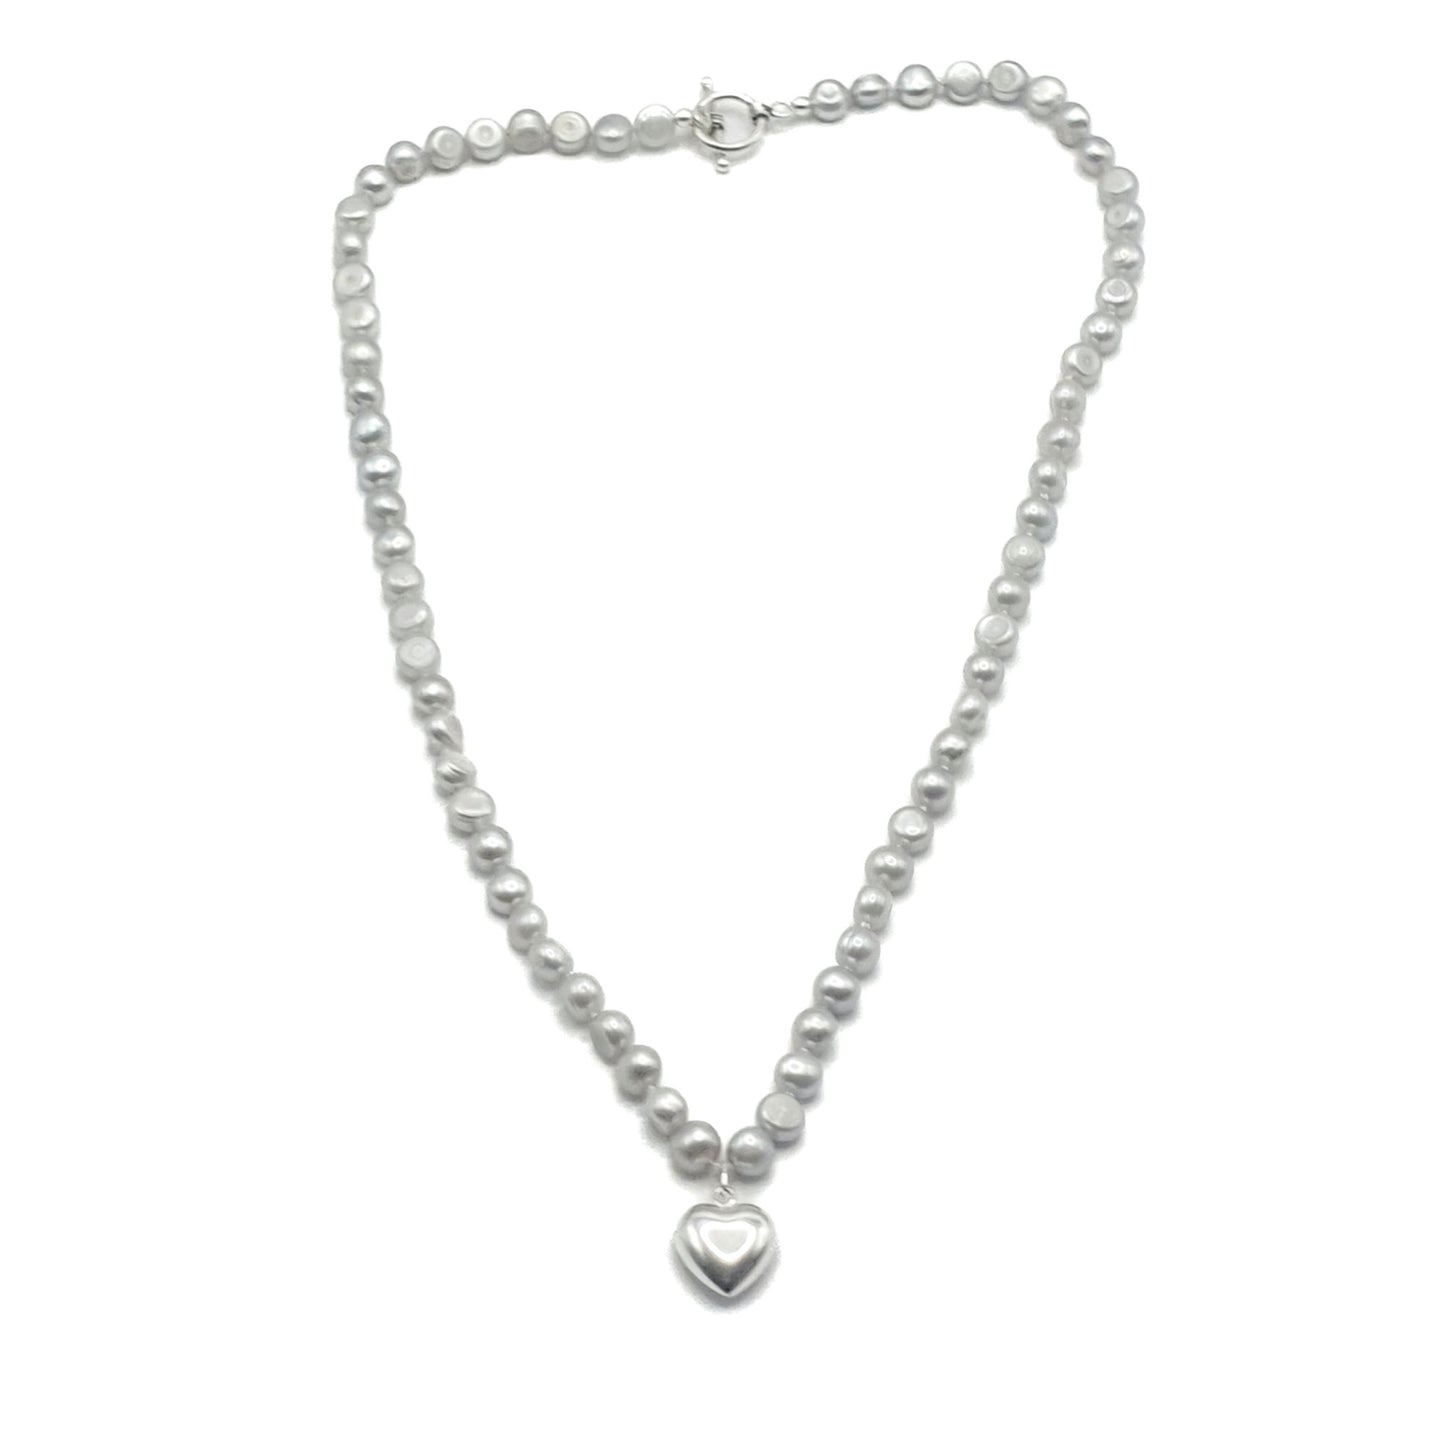 Delicate freshwater pearl necklace in silver-grey with a sterling silver puff heart